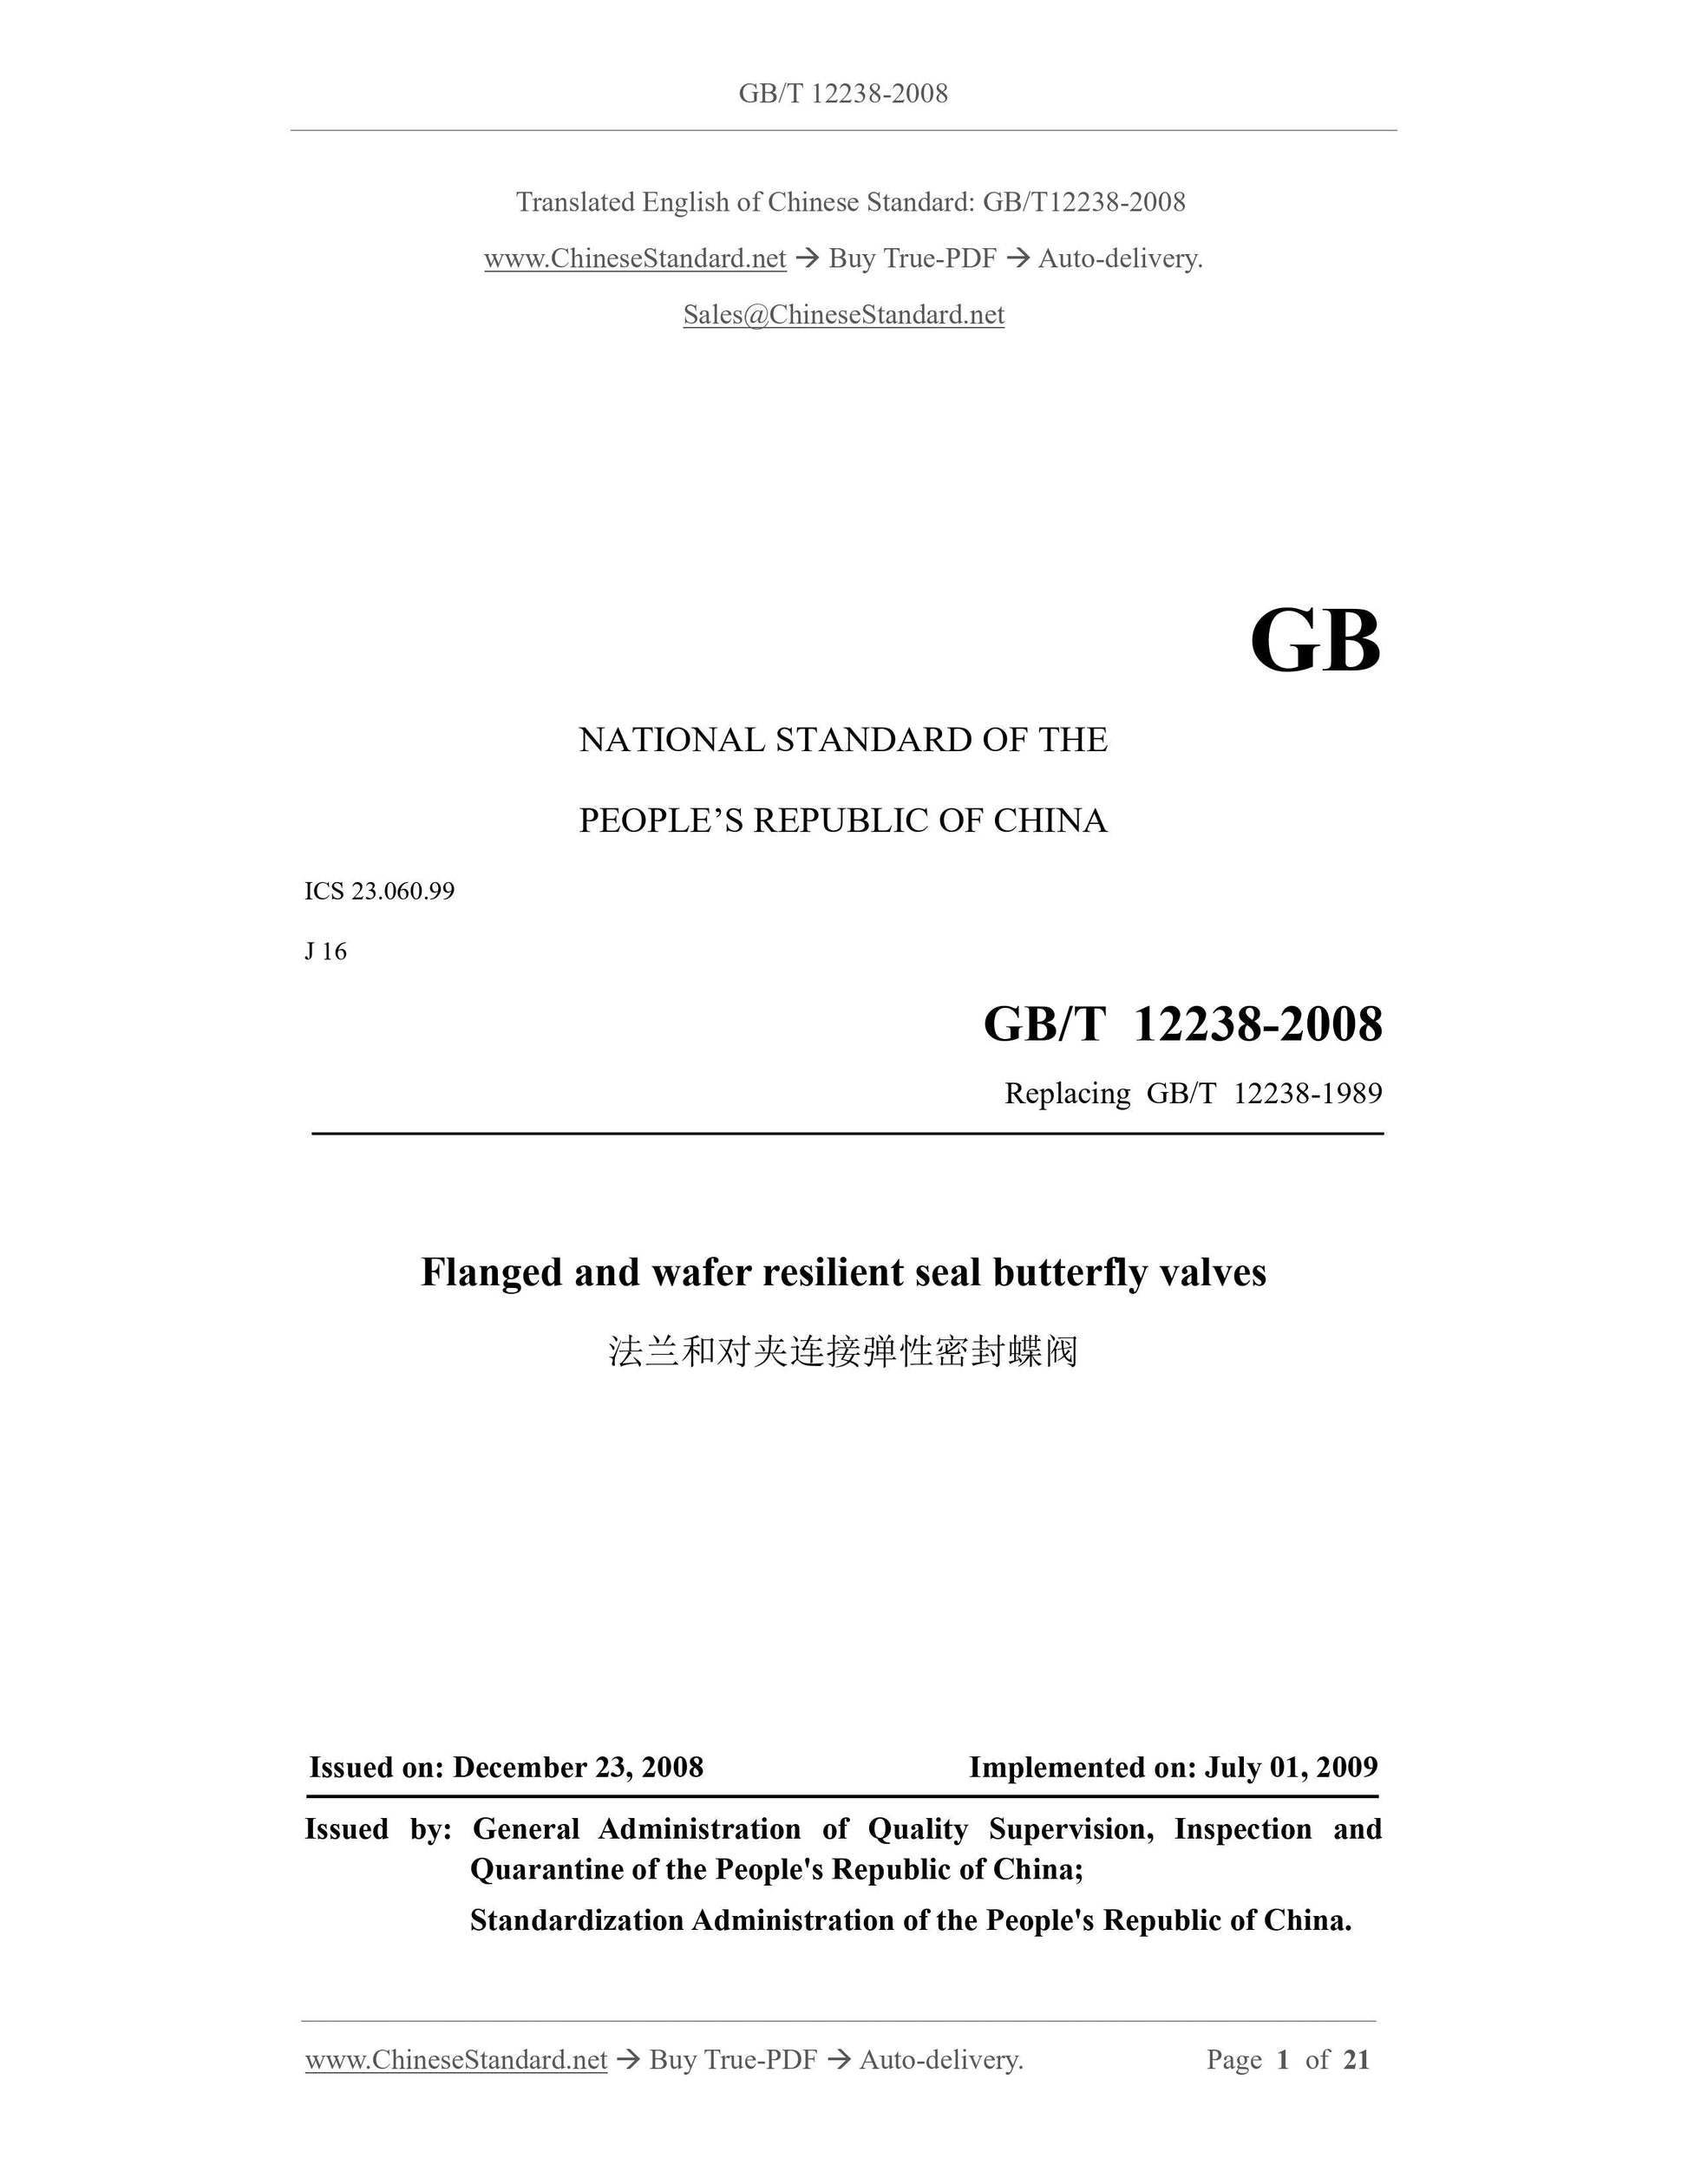 GB/T 12238-2008 Page 1